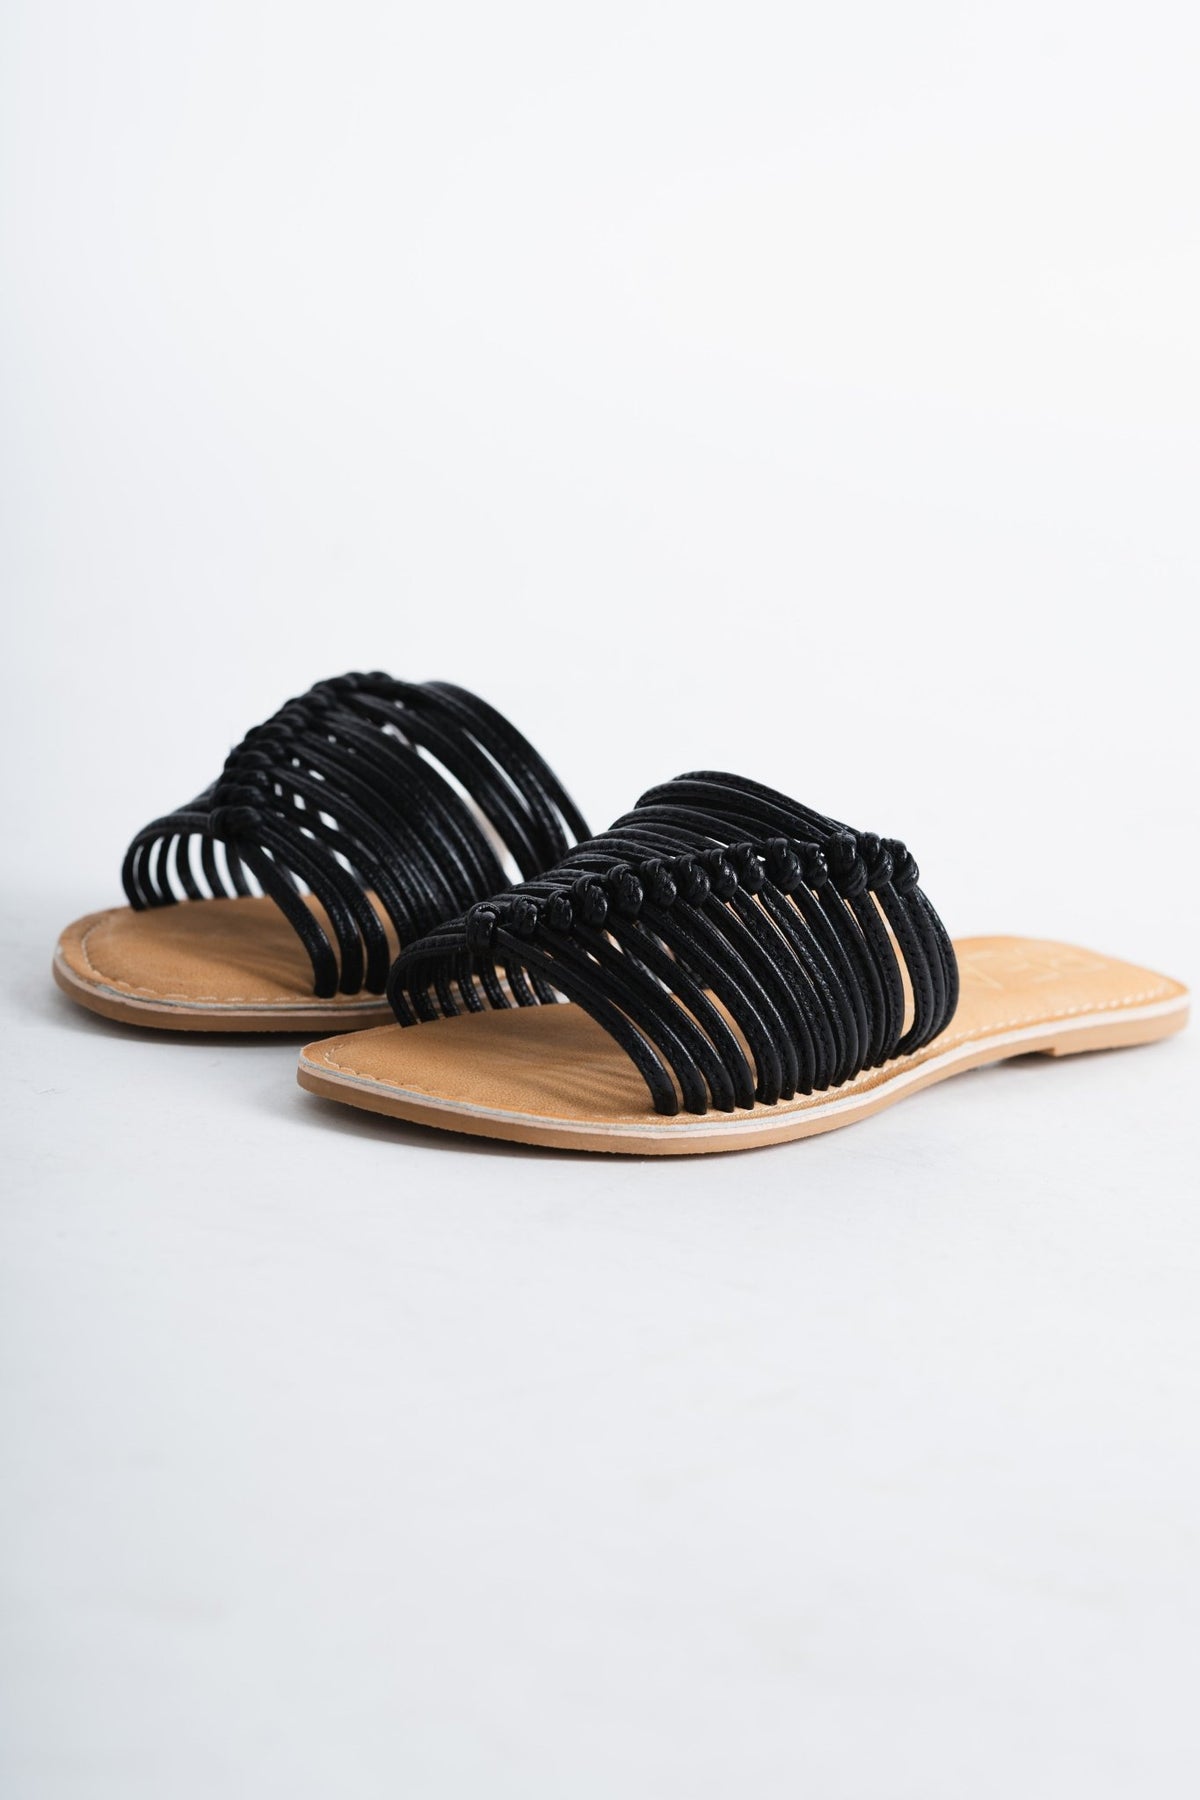 Baxter leather sandals black - Cute shoes - Trendy Shoes at Lush Fashion Lounge Boutique in Oklahoma City